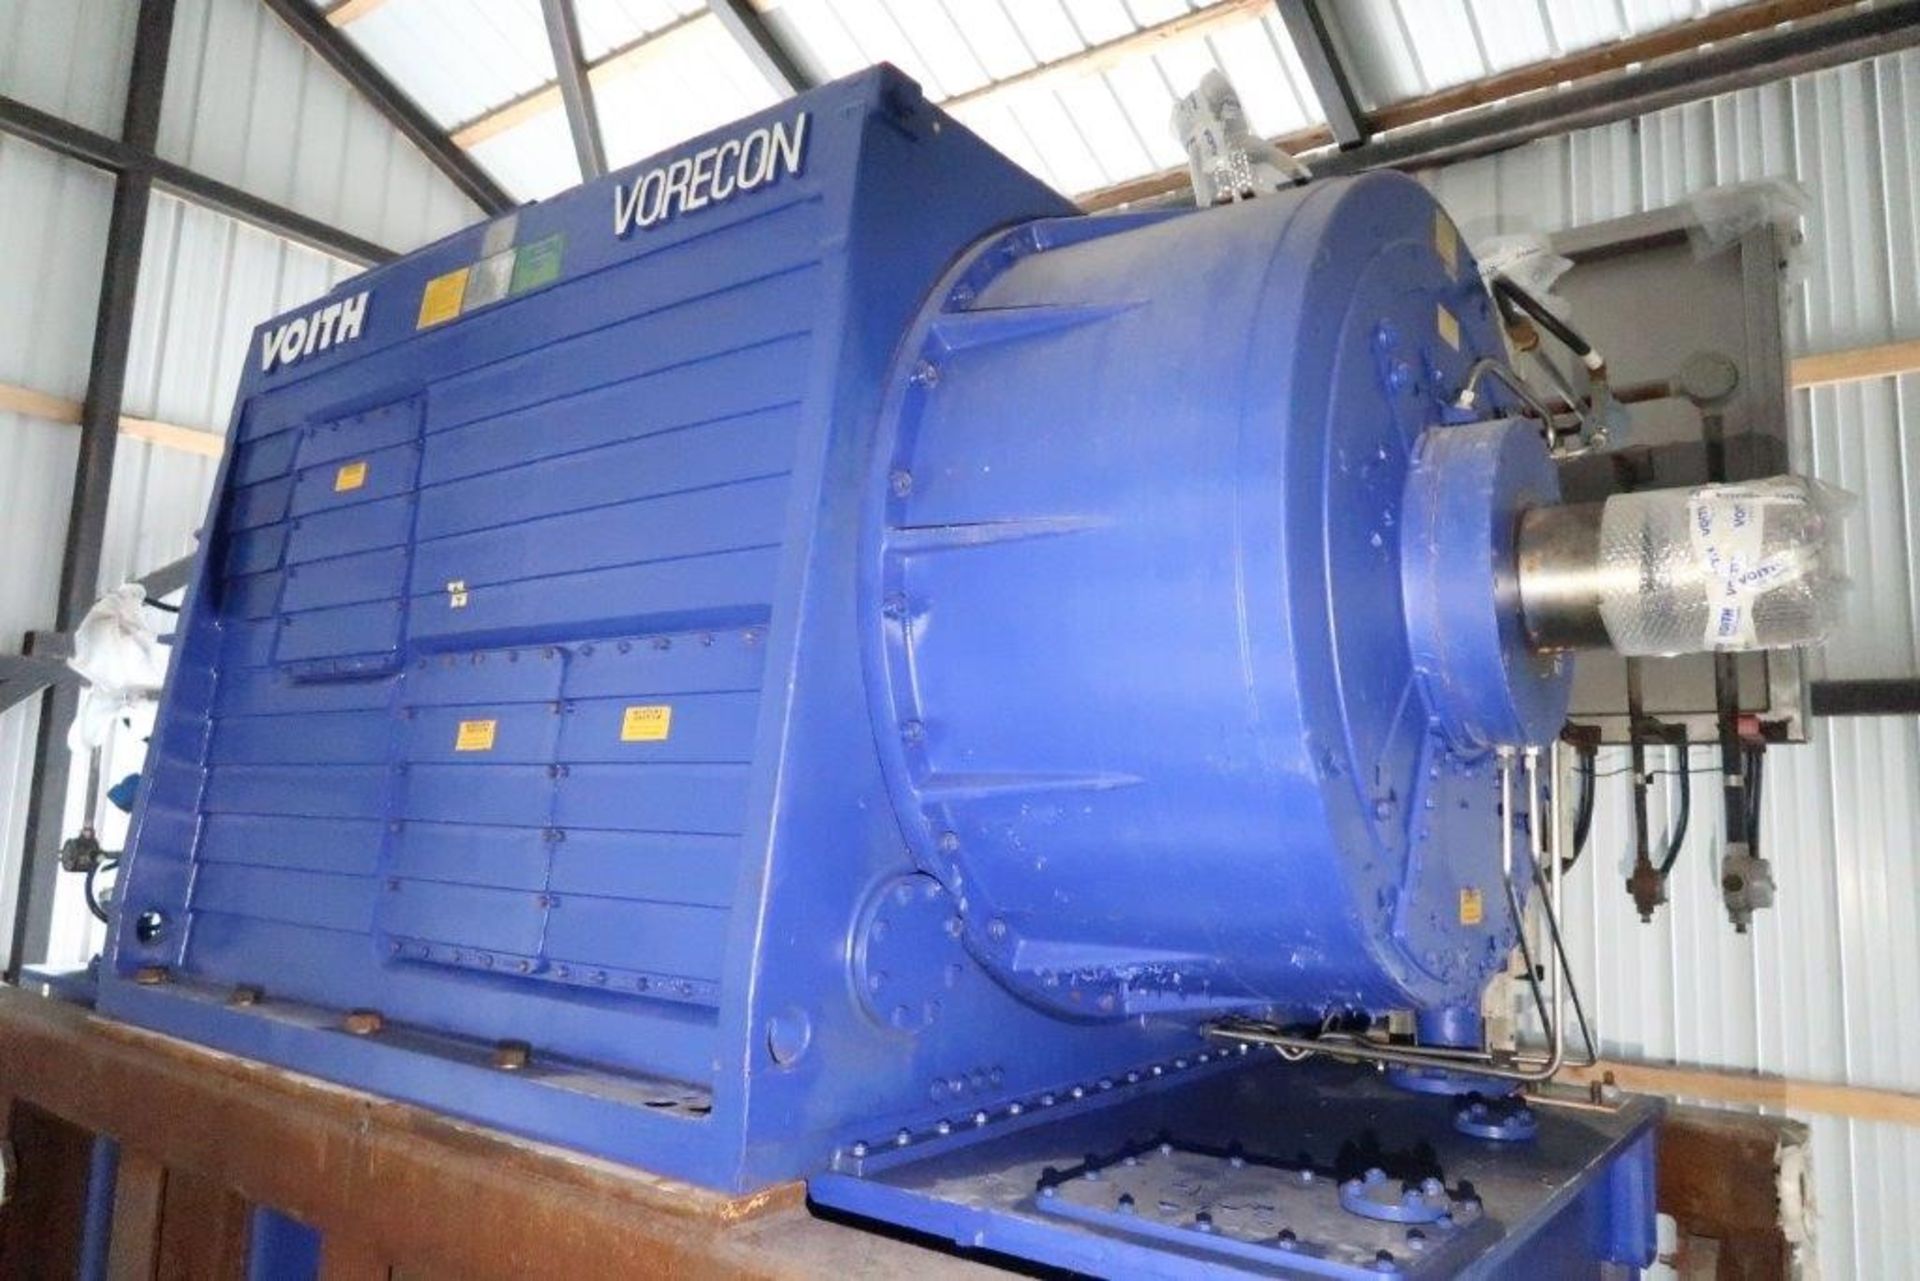 NEW. NEVER INSTALLED! Voith Vorecon RW 14-12 C7 Variable Speed Planetary Gear